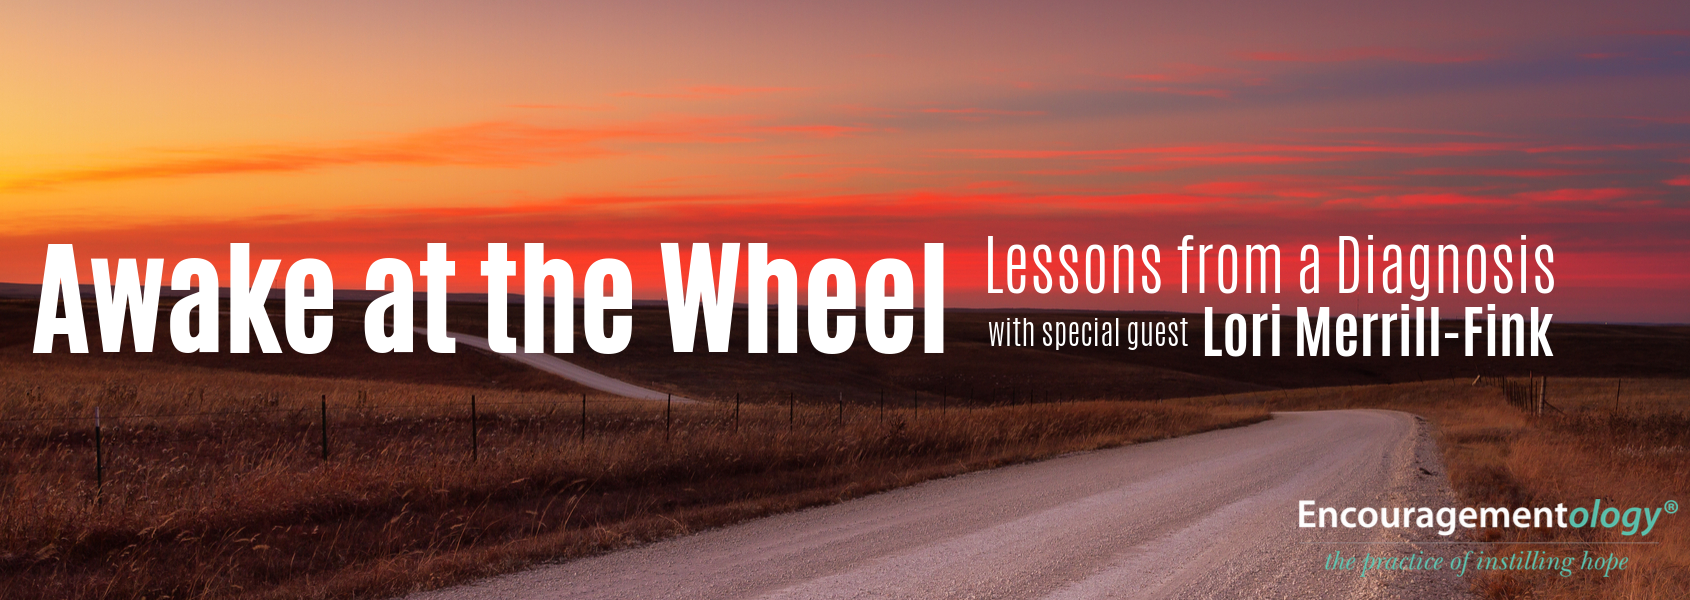 Awake at the Wheel, Lesson from a Diagnosis